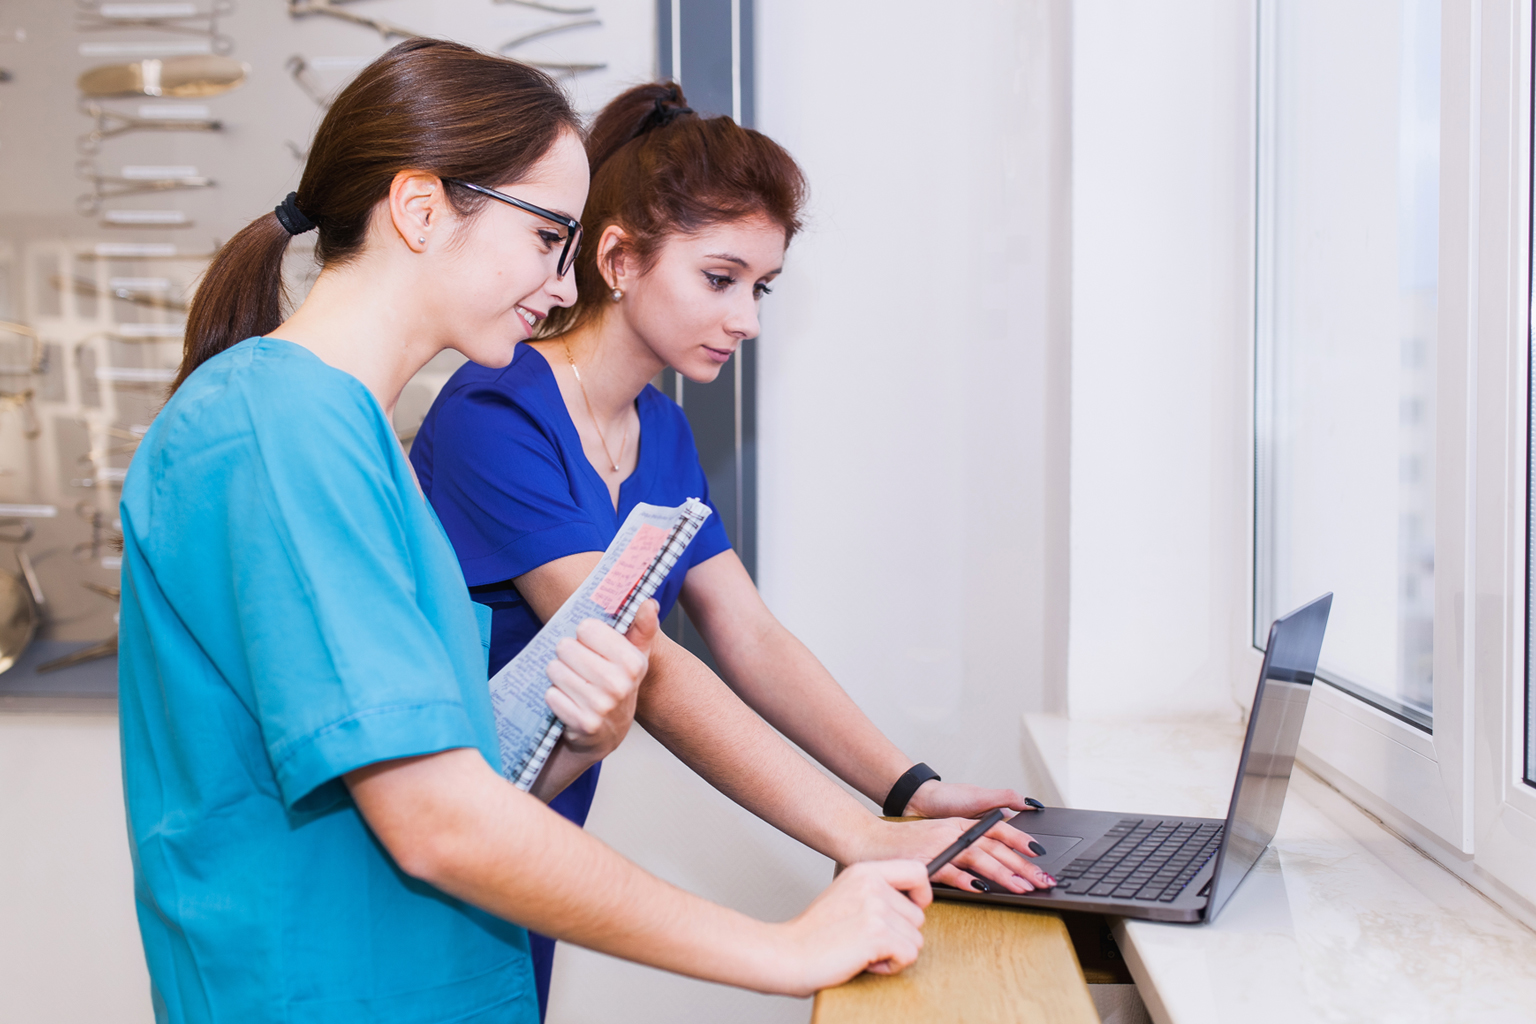 group-of-nurse-medical-students-discussion-in-front-of-laptop-card.jpg